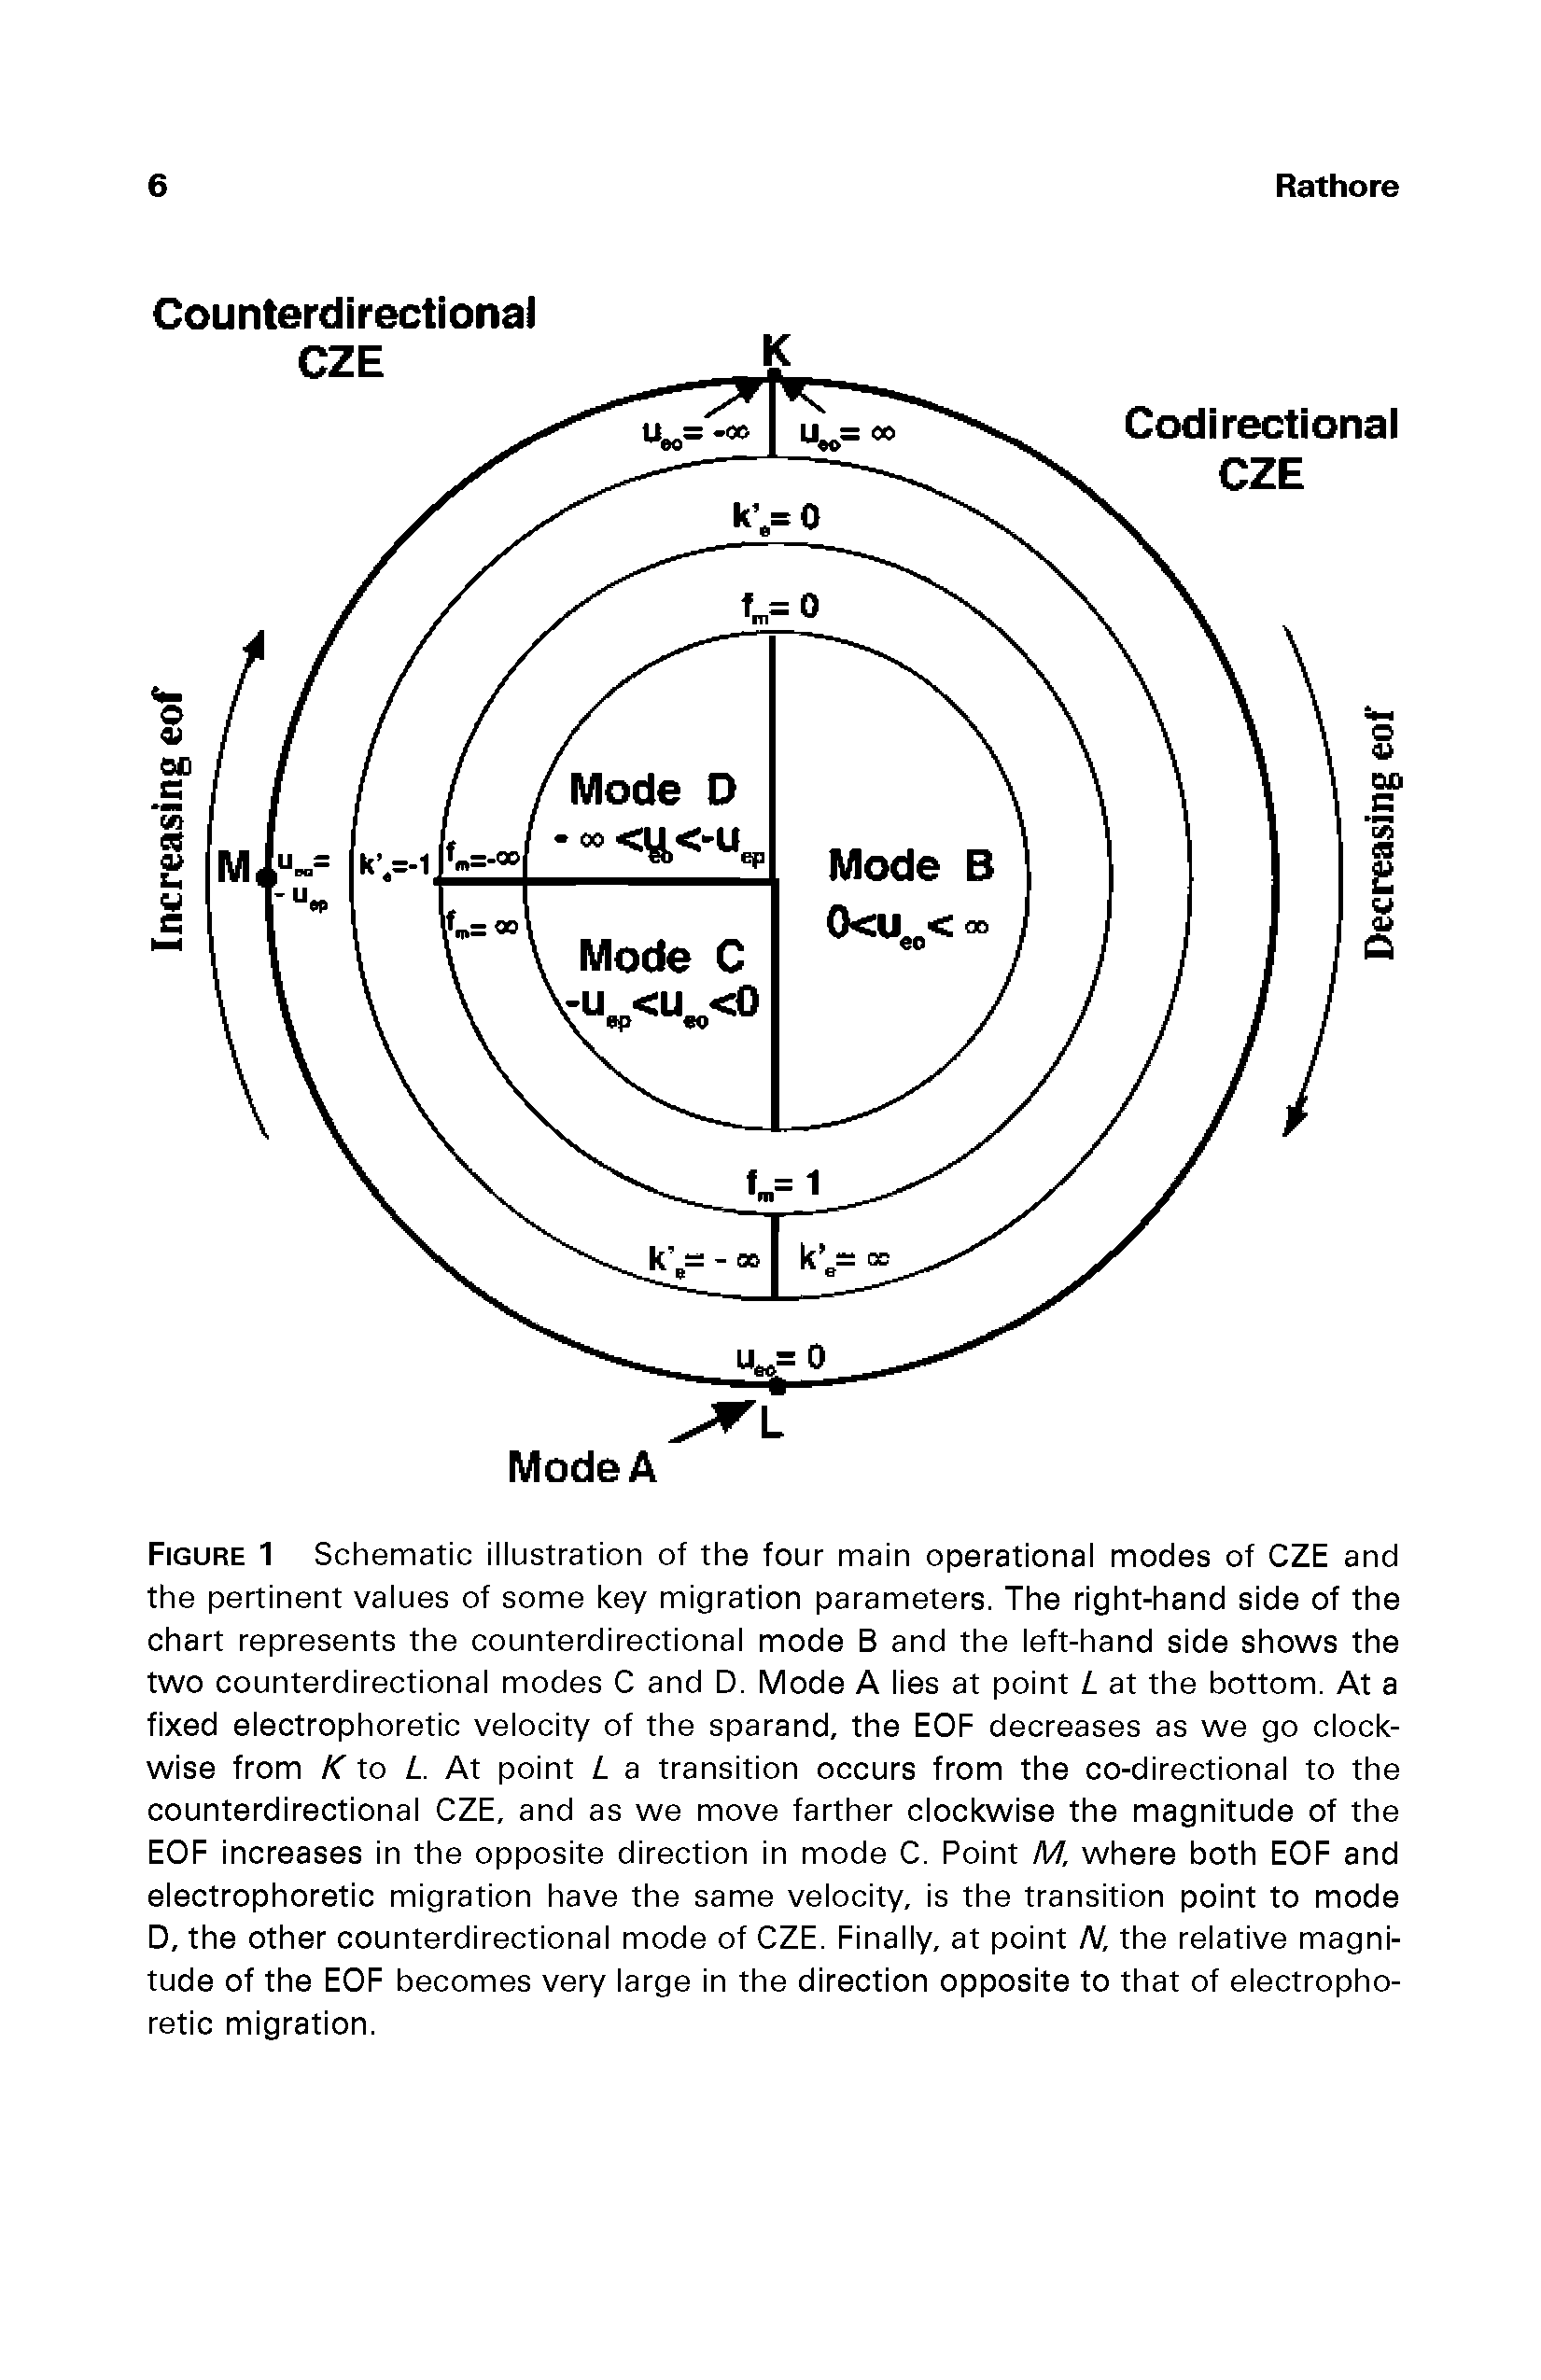 Figure 1 Schematic illustration of the four main operational modes of CZE and the pertinent values of some key migration parameters. The right-hand side of the chart represents the counterdirectional mode B and the left-hand side shows the two counterdirectional modes C and D. Mode A lies at point L at the bottom. At a fixed electrophoretic velocity of the sparand, the EOF decreases as we go clockwise from K to L. At point L a transition occurs from the co-directional to the counterdirectional CZE, and as we move farther clockwise the magnitude of the EOF increases in the opposite direction in mode C. Point M, where both EOF and electrophoretic migration have the same velocity, is the transition point to mode D, the other counterdirectional mode of CZE. Finally, at point N, the relative magnitude of the EOF becomes very large in the direction opposite to that of electrophoretic migration.